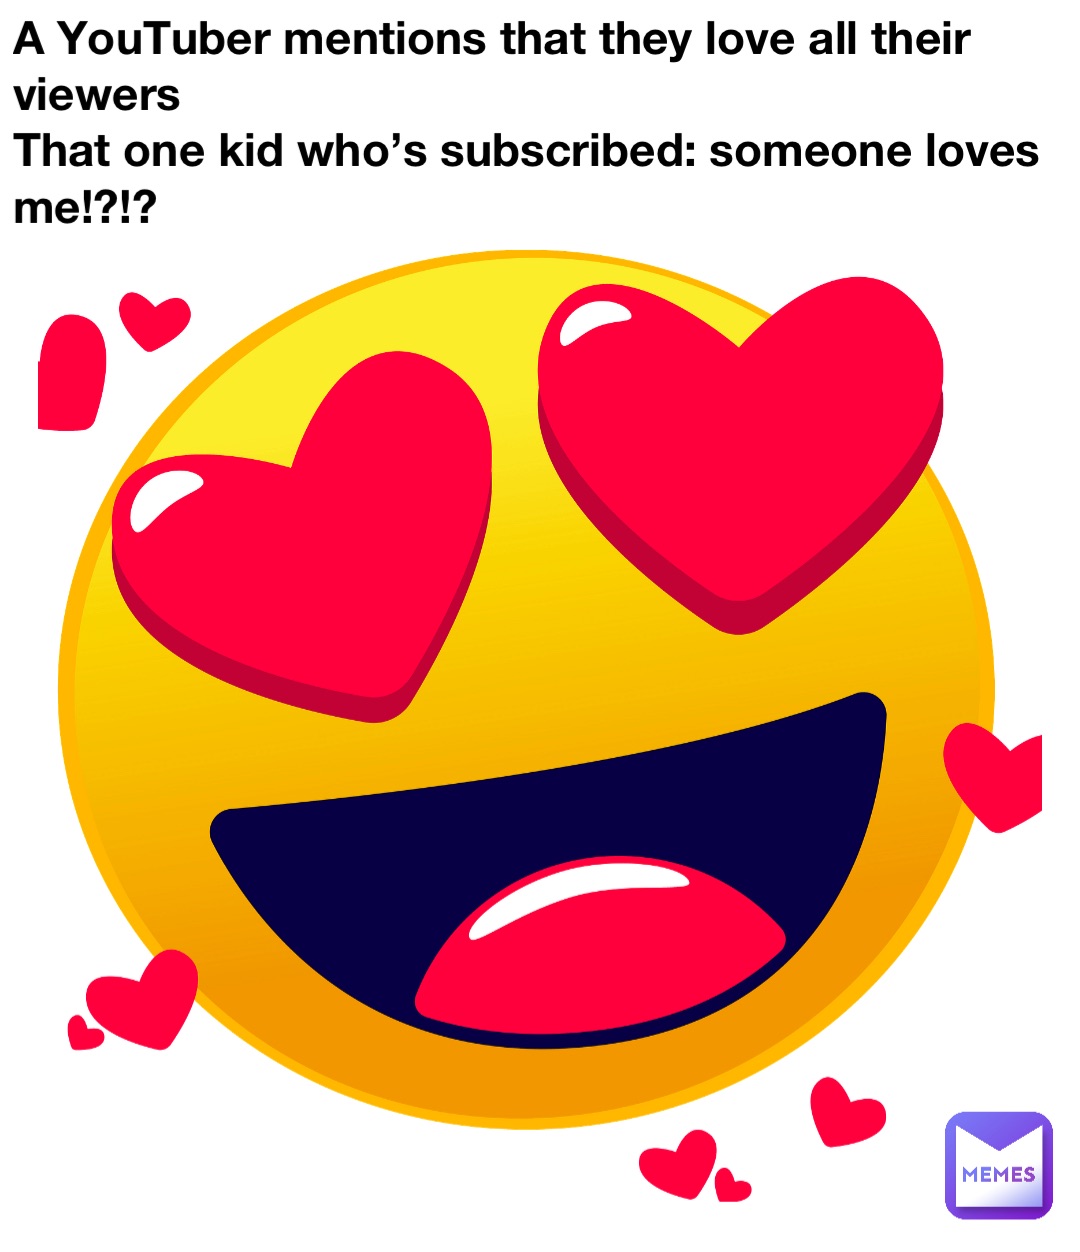 A YouTuber mentions that they love all their viewers
That one kid who’s subscribed: someone loves me!?!?